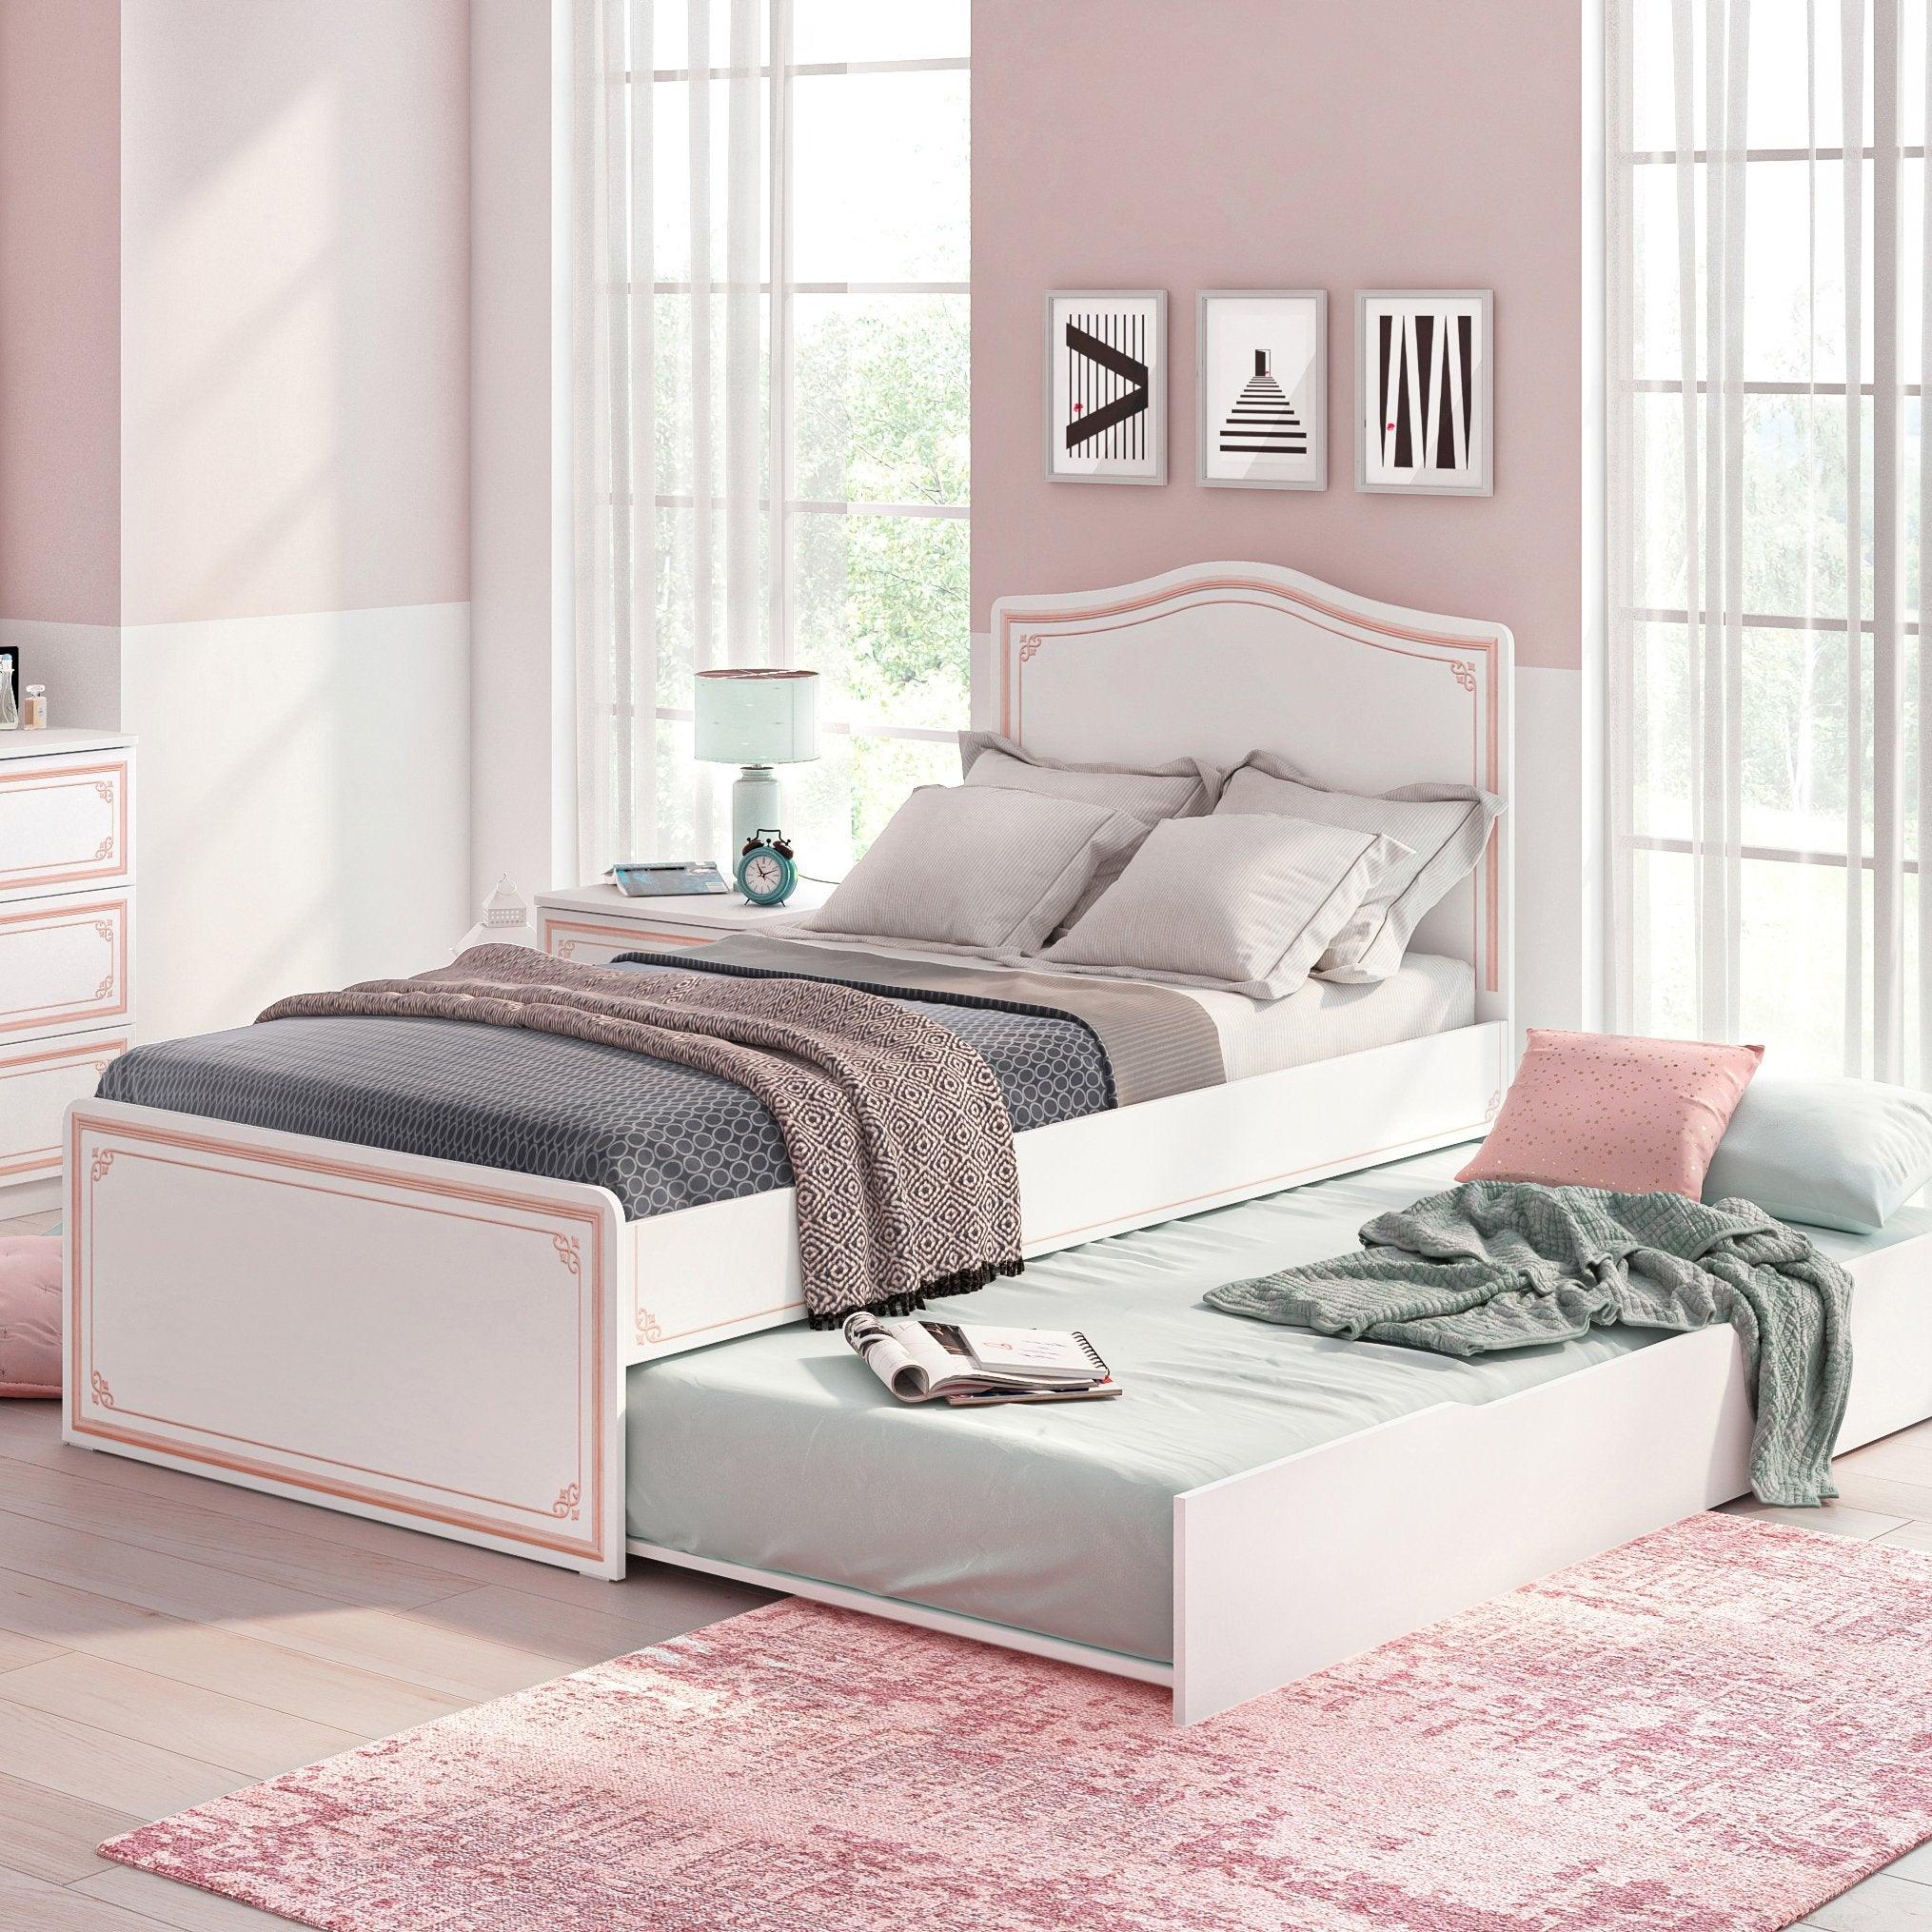 Cilek Selena Pink Bed (100X200 Cm Or 120X200 Cm - With Pull Out Options)